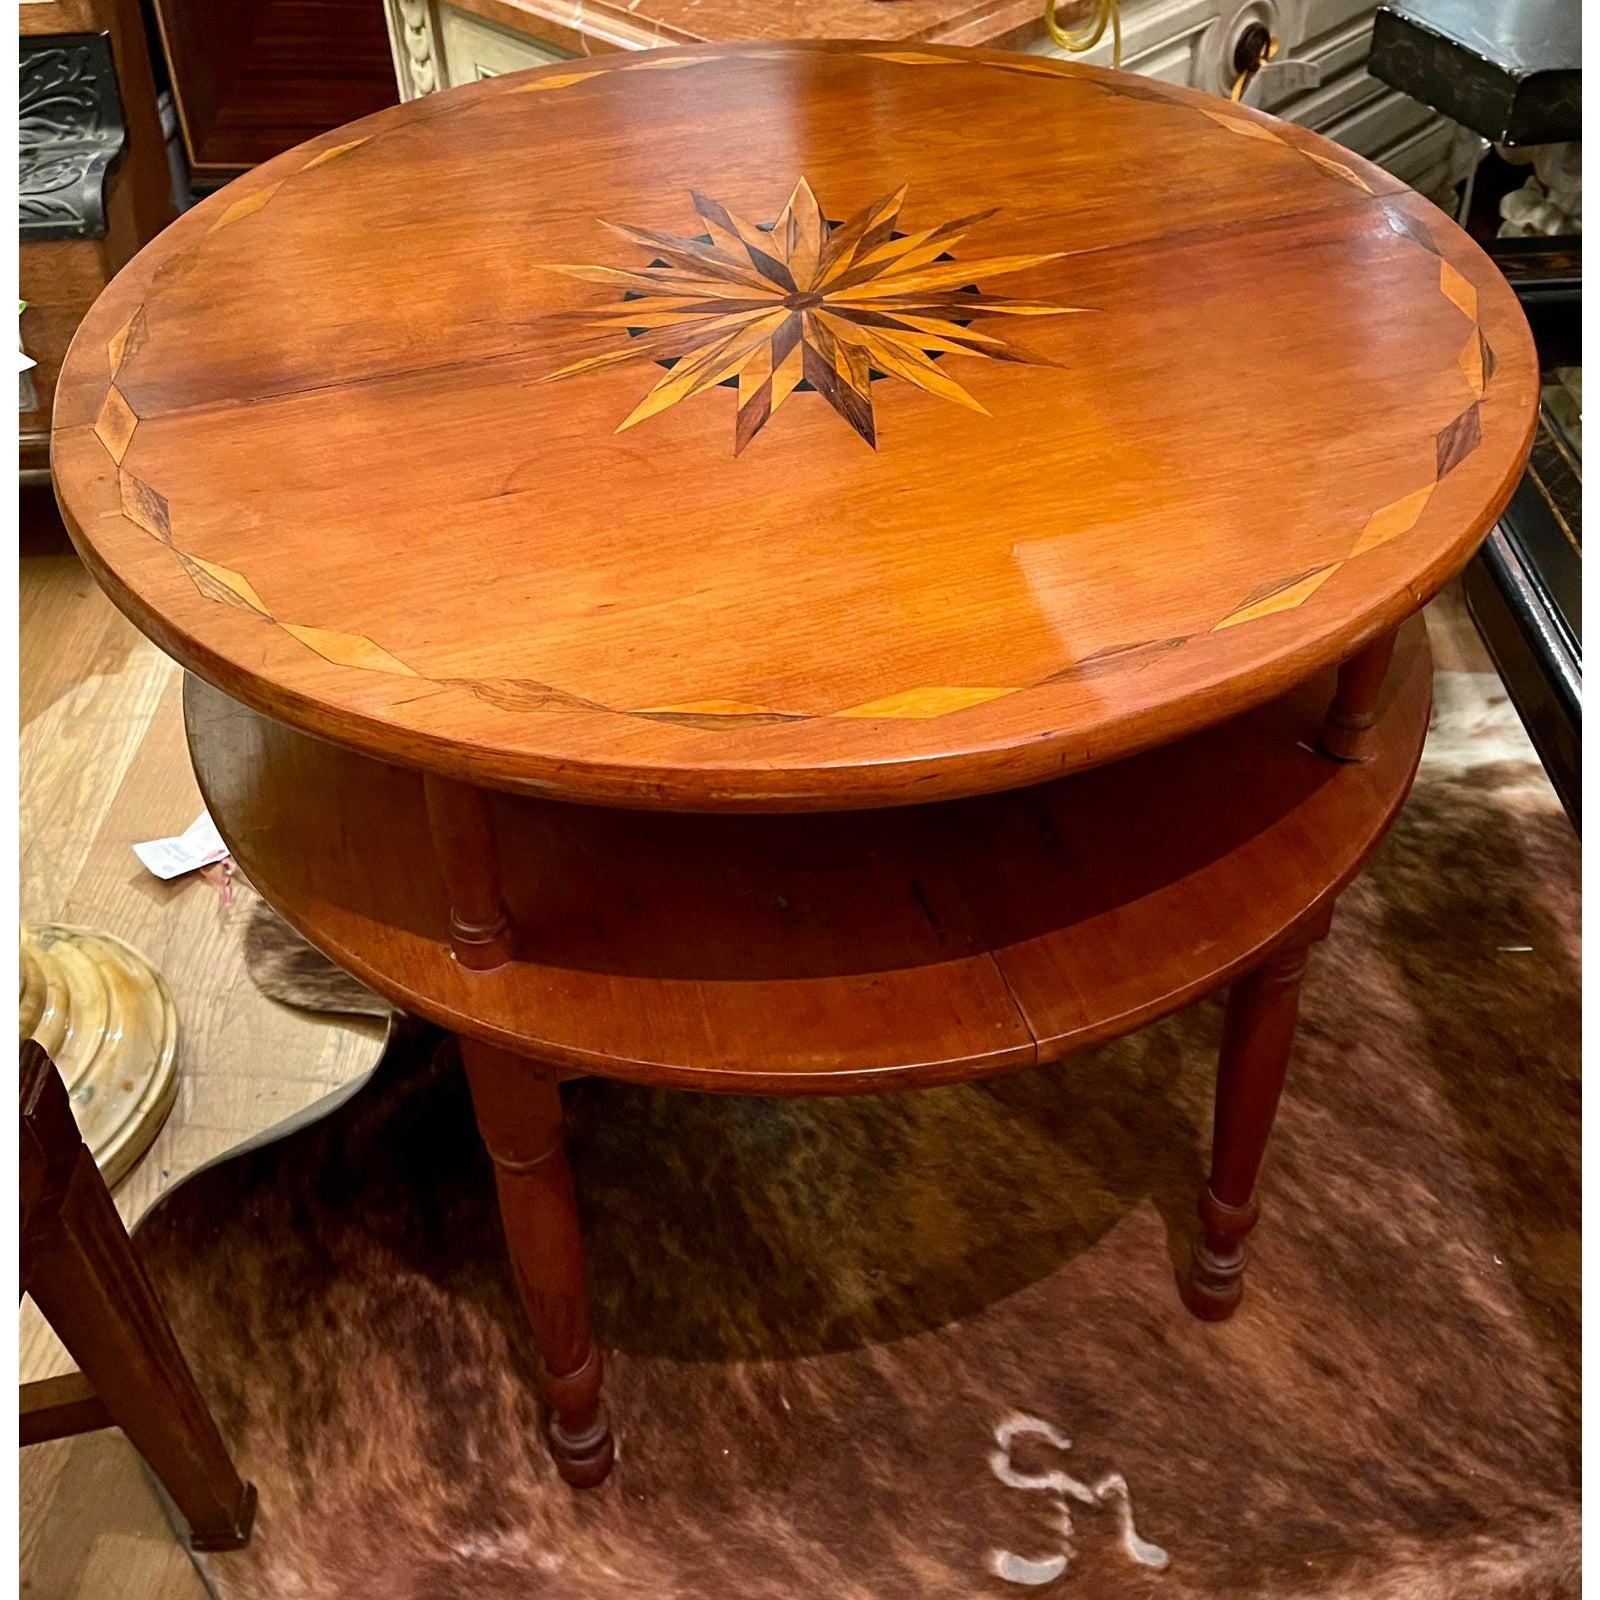 Wood Antique Early 19th Century American Sheraton Inlaid Cherry Table For Sale